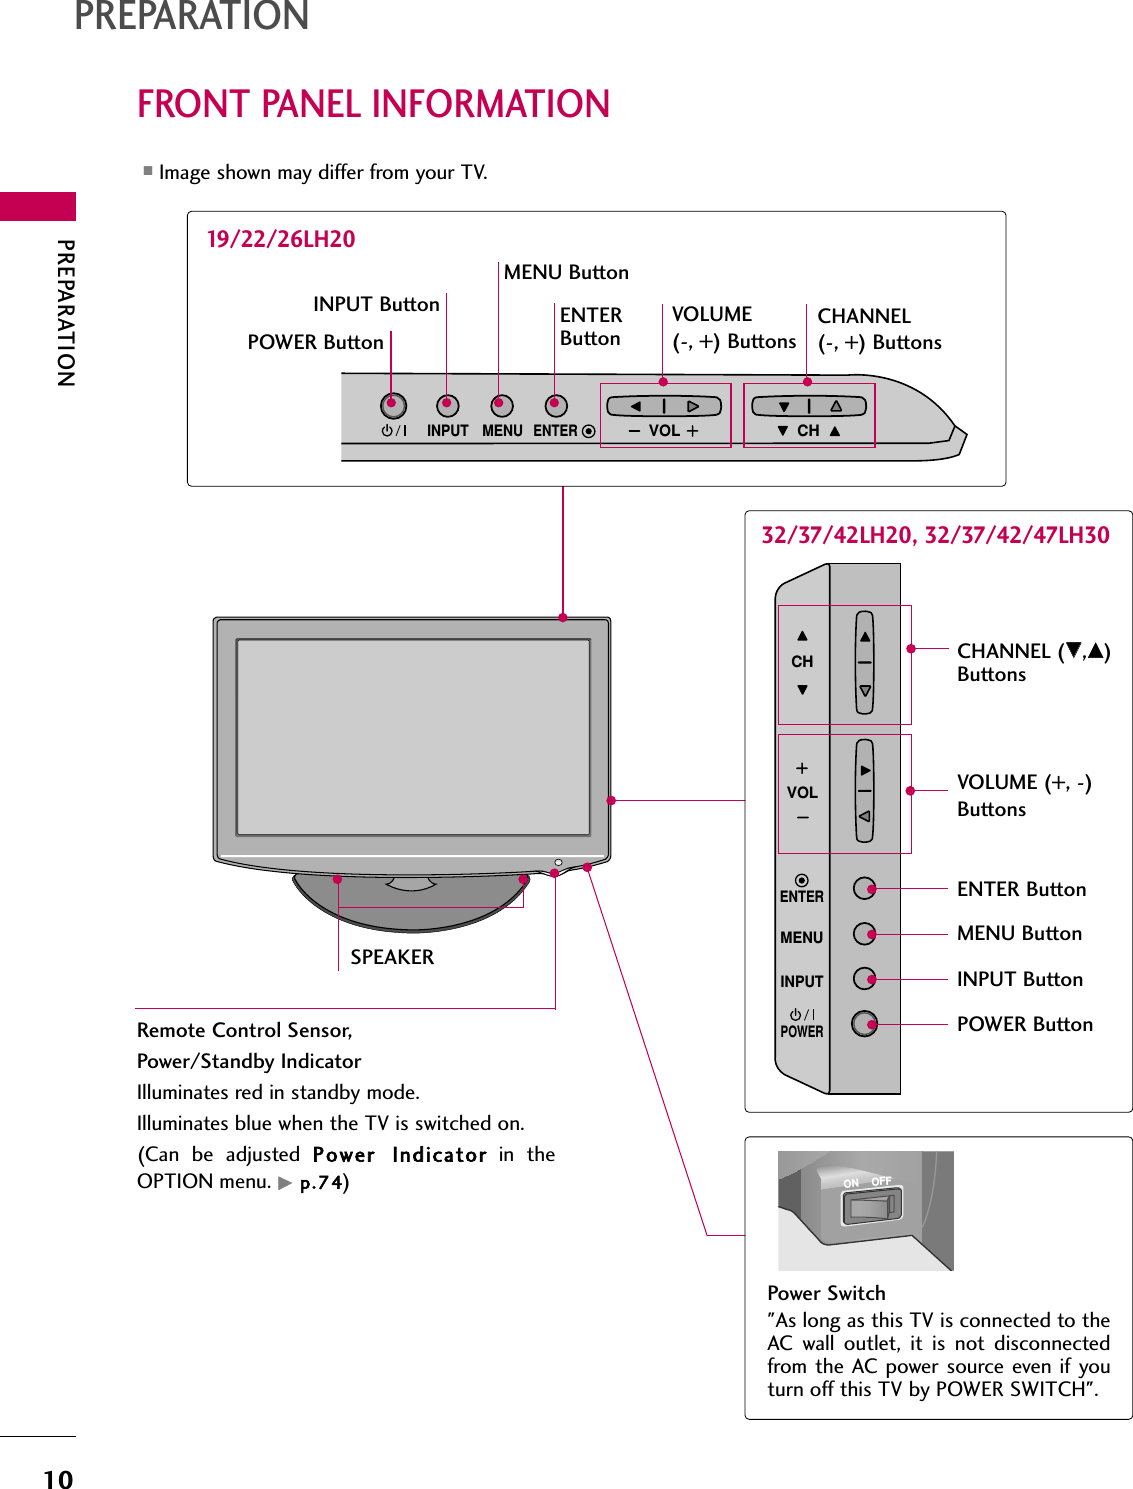 PREPARATION10FRONT PANEL INFORMATIONPREPARATION■Image shown may differ from your TV.32/37/42LH20, 32/37/42/47LH30INPUT MENUVOL CHENTERCHANNEL(-, +) ButtonsVOLUME(-, +) ButtonsENTERButton19/22/26LH20MENU ButtonPOWER ButtonINPUT ButtonINPUTMENUENTERCHVOLPOWERCHANNEL (EE,D)ButtonsVOLUME (+, -) ButtonsENTER ButtonMENU ButtonINPUT ButtonPOWER ButtonSPEAKERRemote Control Sensor,Power/Standby IndicatorIlluminates red in standby mode.Illuminates blue when the TV is switched on.(Can be adjusted Power  Indicator in theOPTION menu. Gp.74)Power Switch&quot;As long as this TV is connected to theAC wall outlet, it is not disconnectedfrom the AC power source even if youturn off this TV by POWER SWITCH&quot;.ON OFF